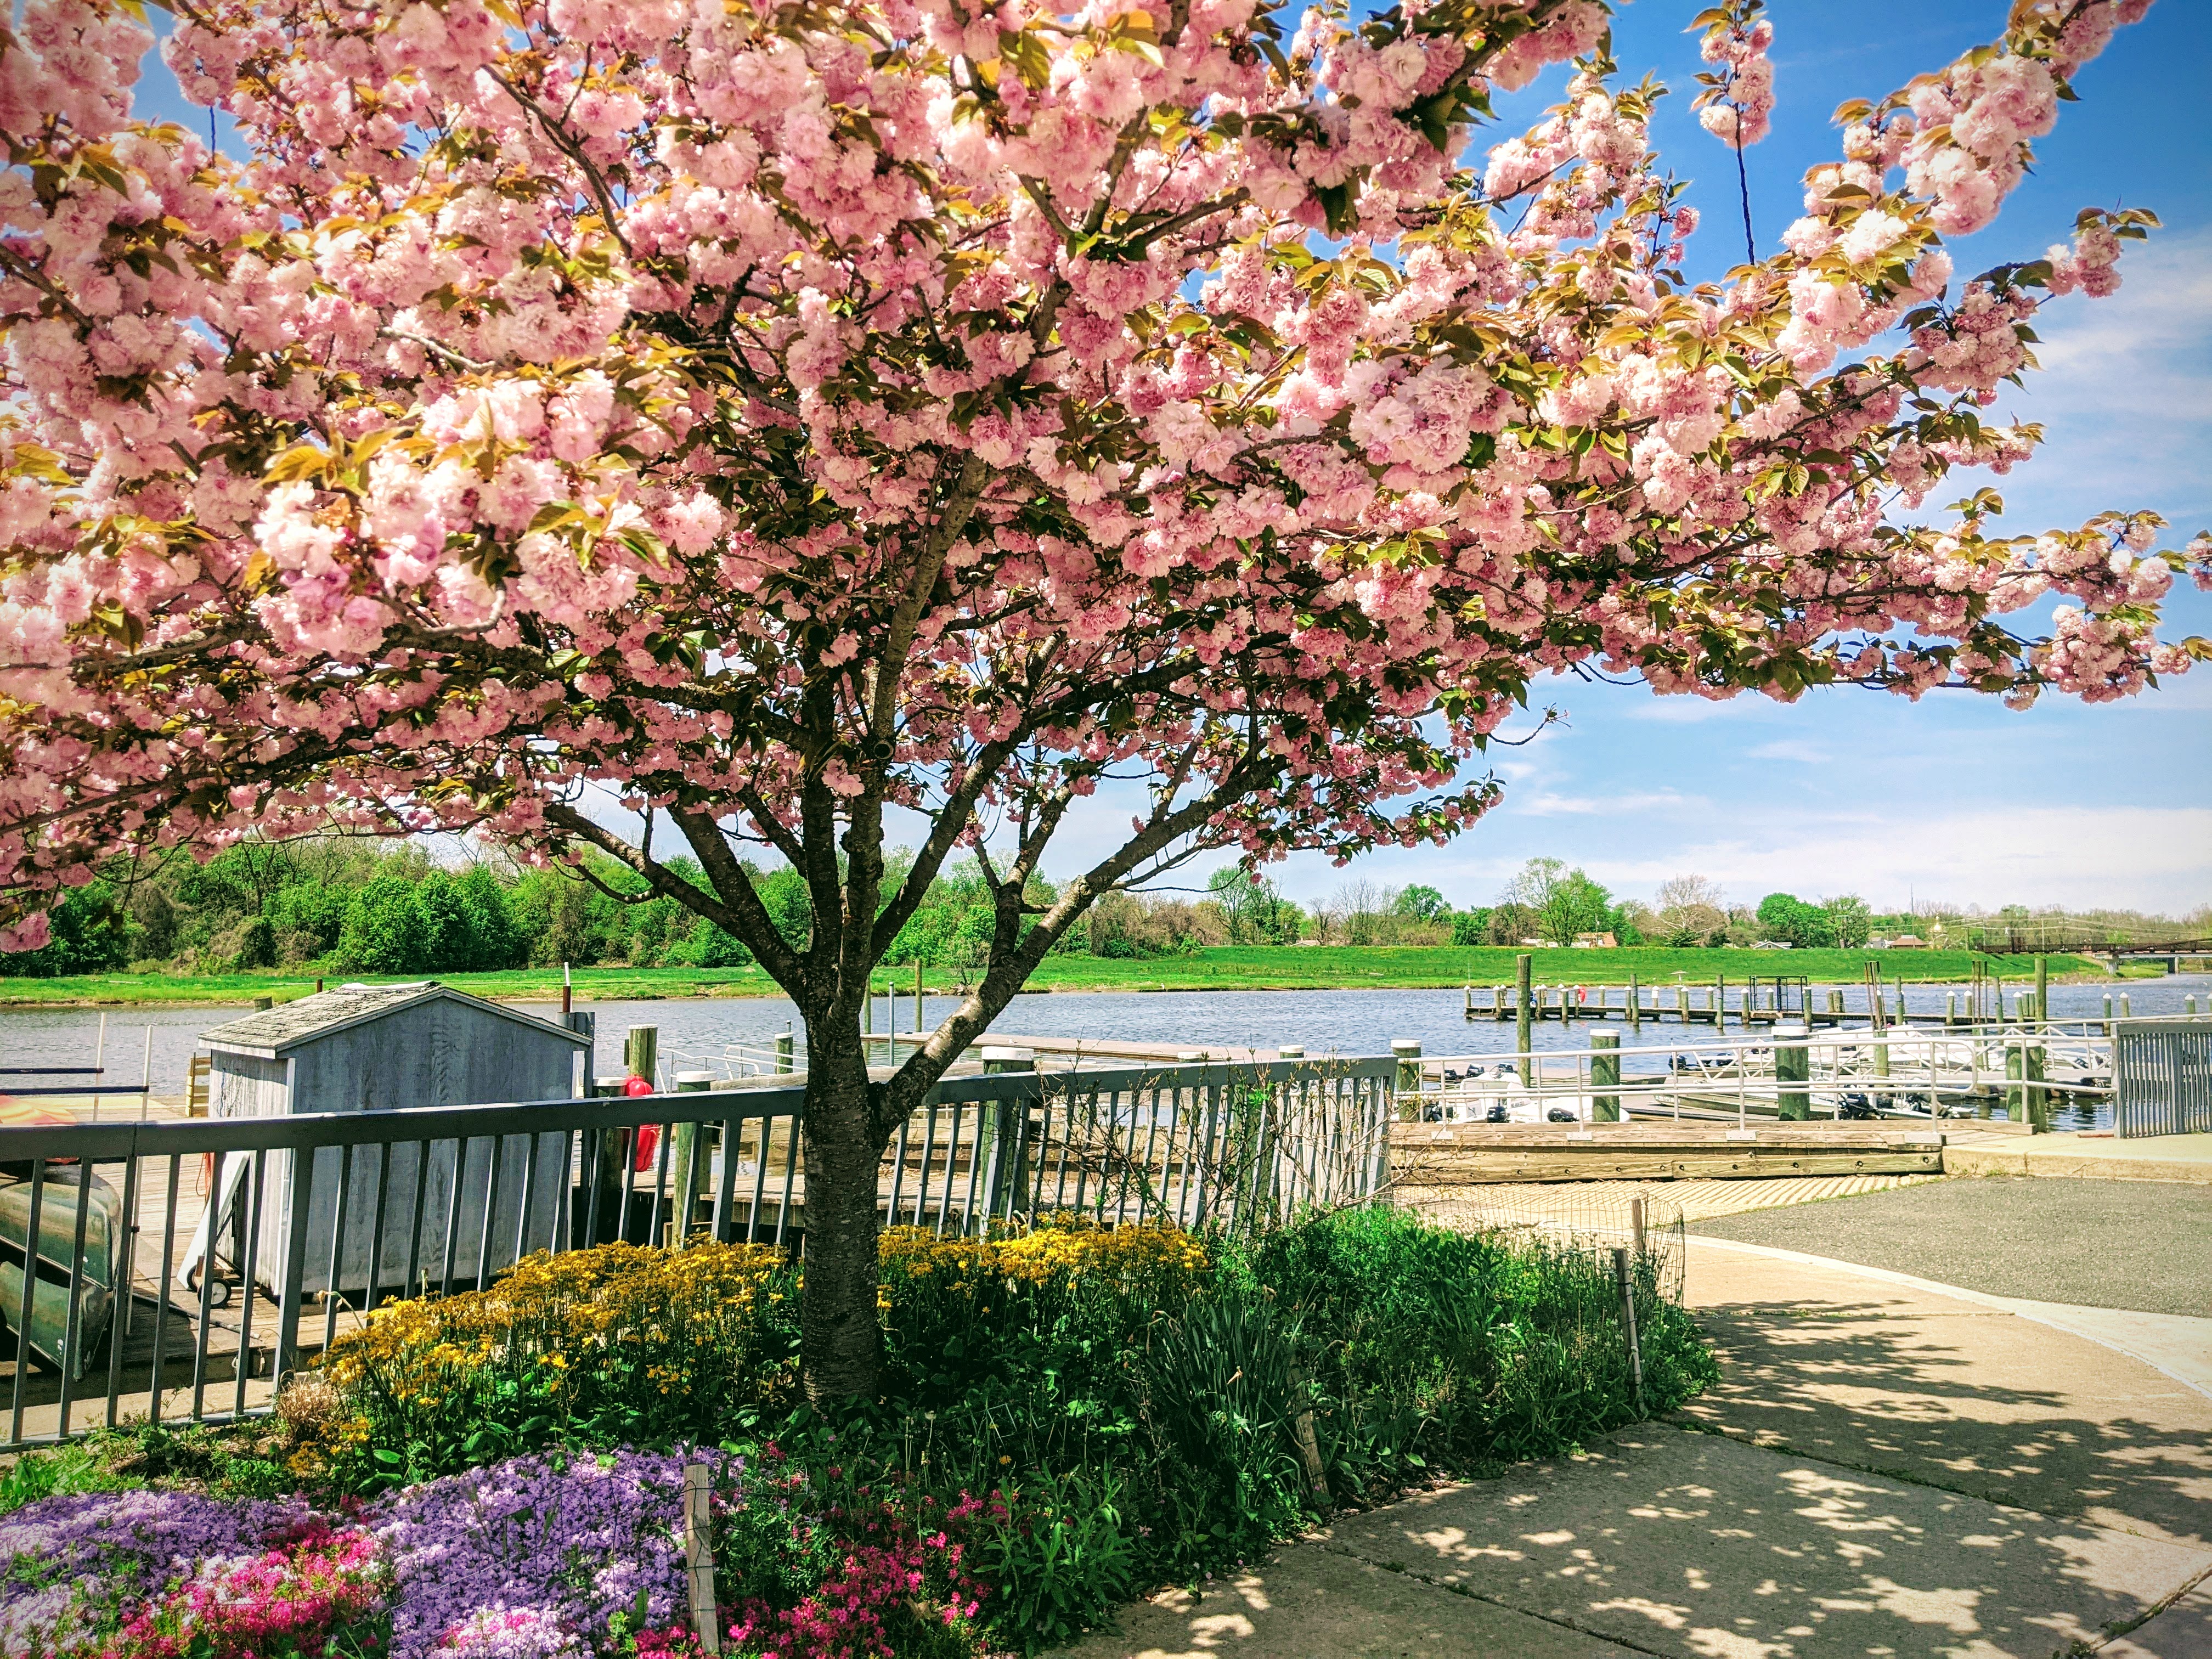 Bladensburg Waterfront Park Boat Ramp in the Spring: blue skies and a Cherry Blossom Tree in bloom